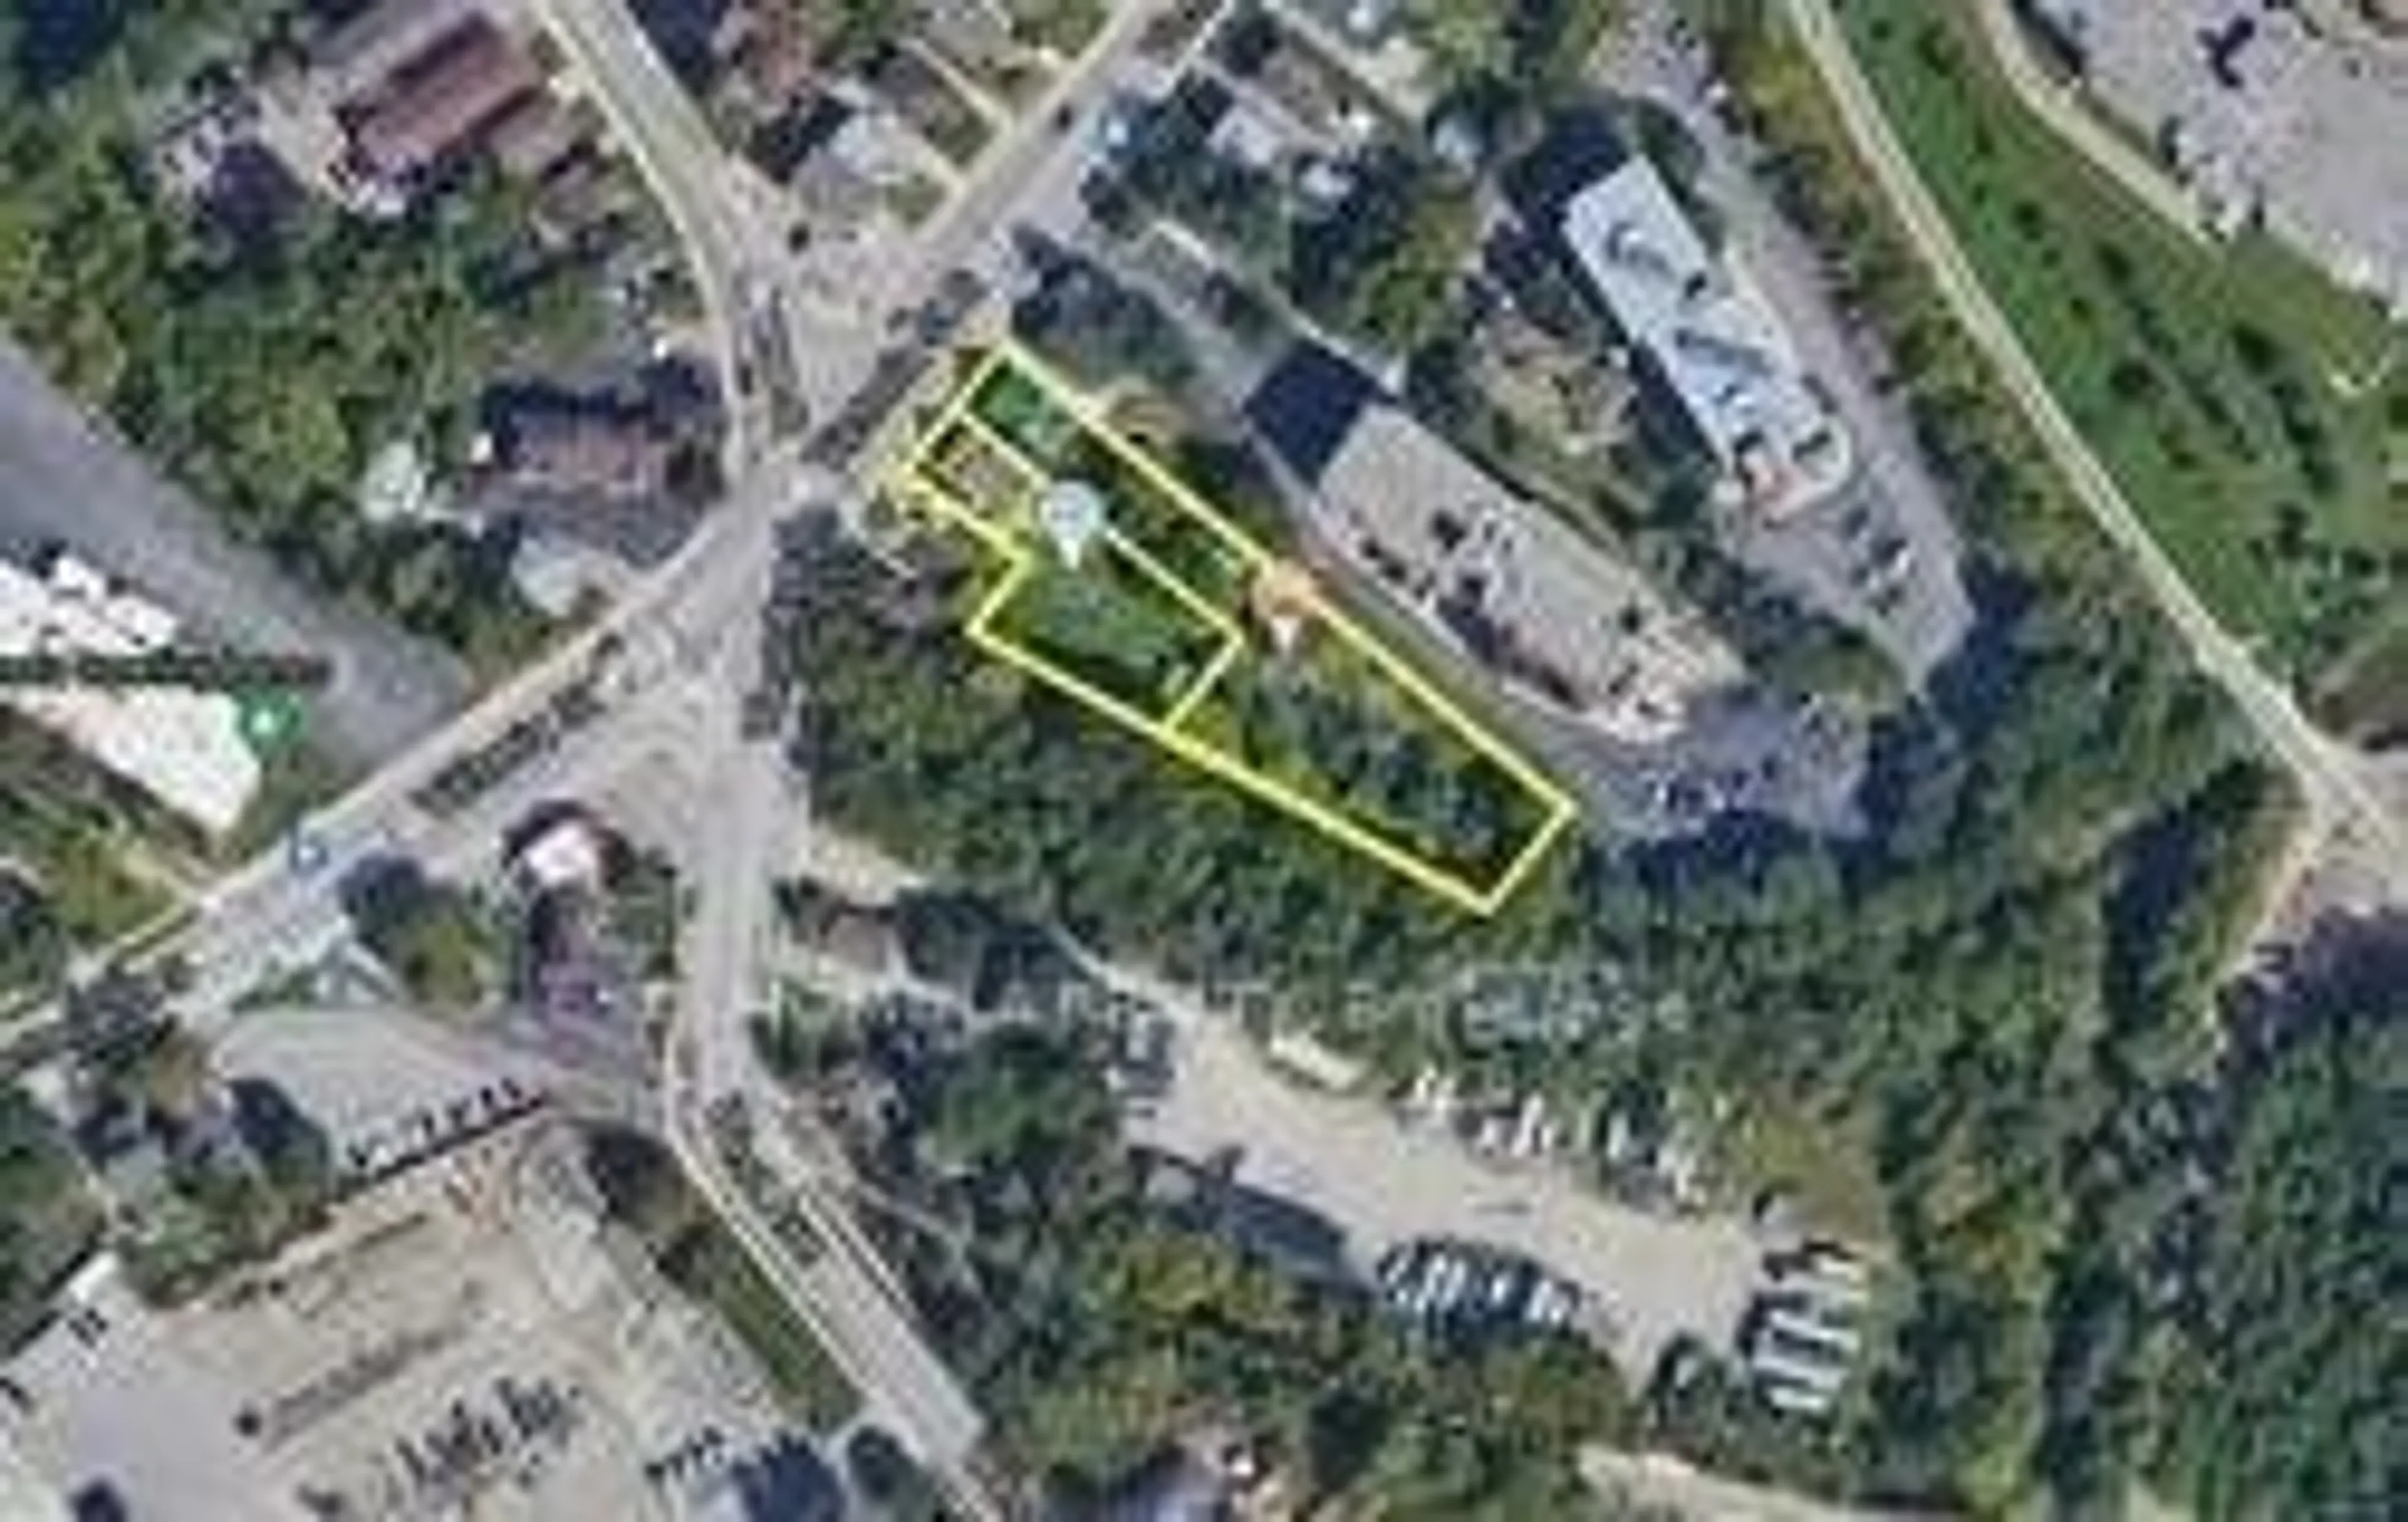 Picture of a map for 257 Victoria St, Kitchener Ontario N2G 2C1